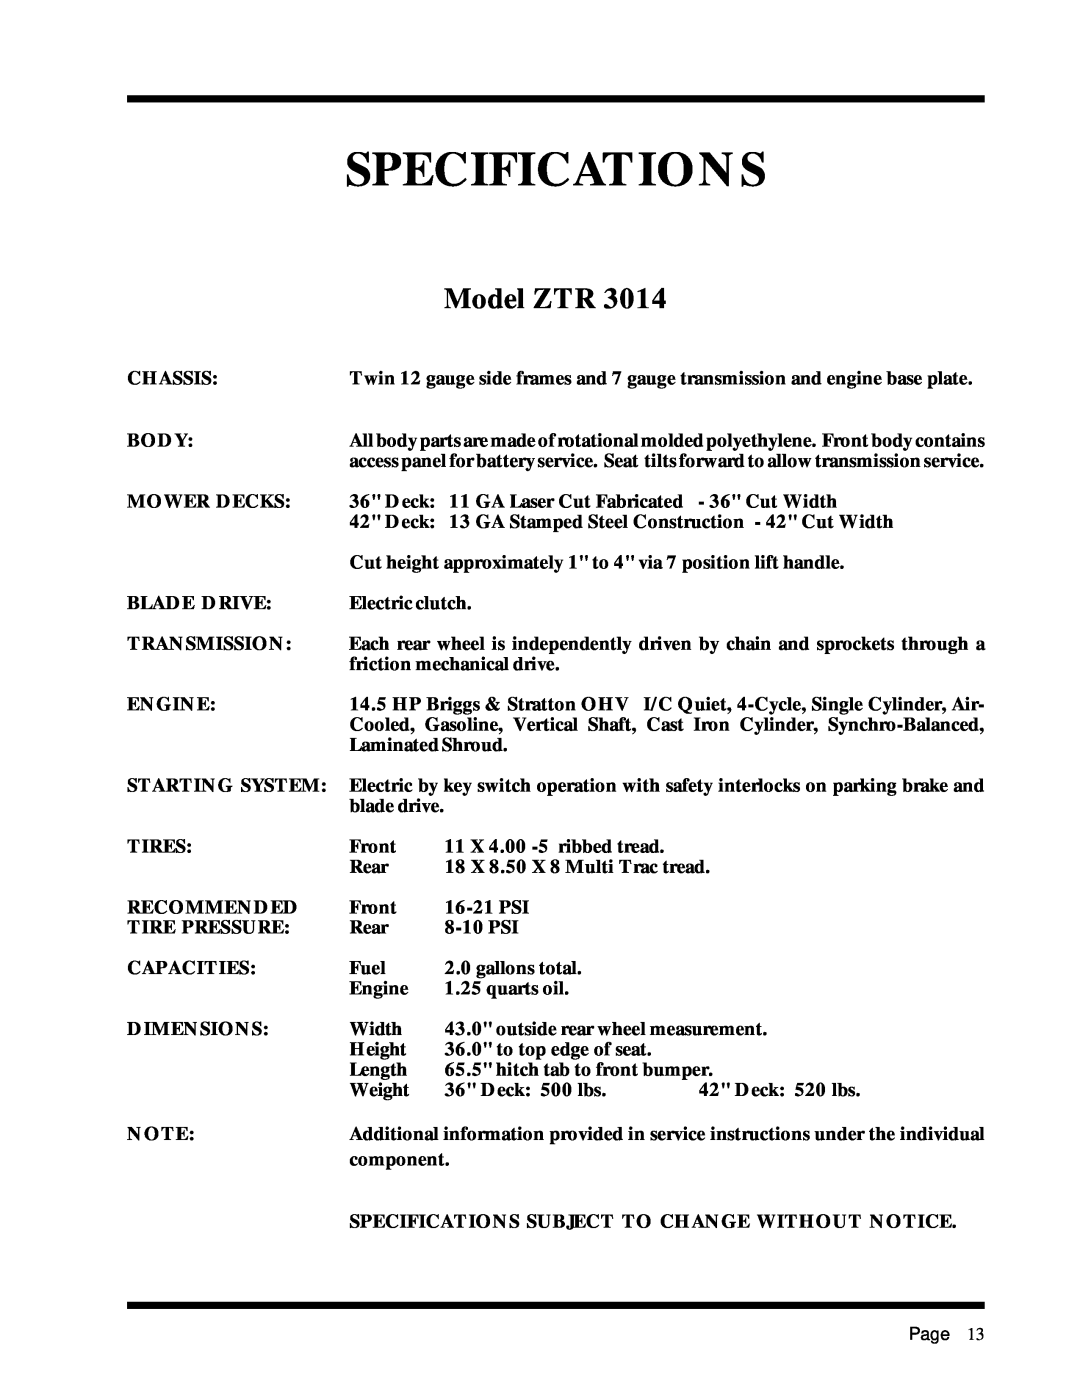 Dixon 6025 manual Specifications, Model ZTR, Chassis 